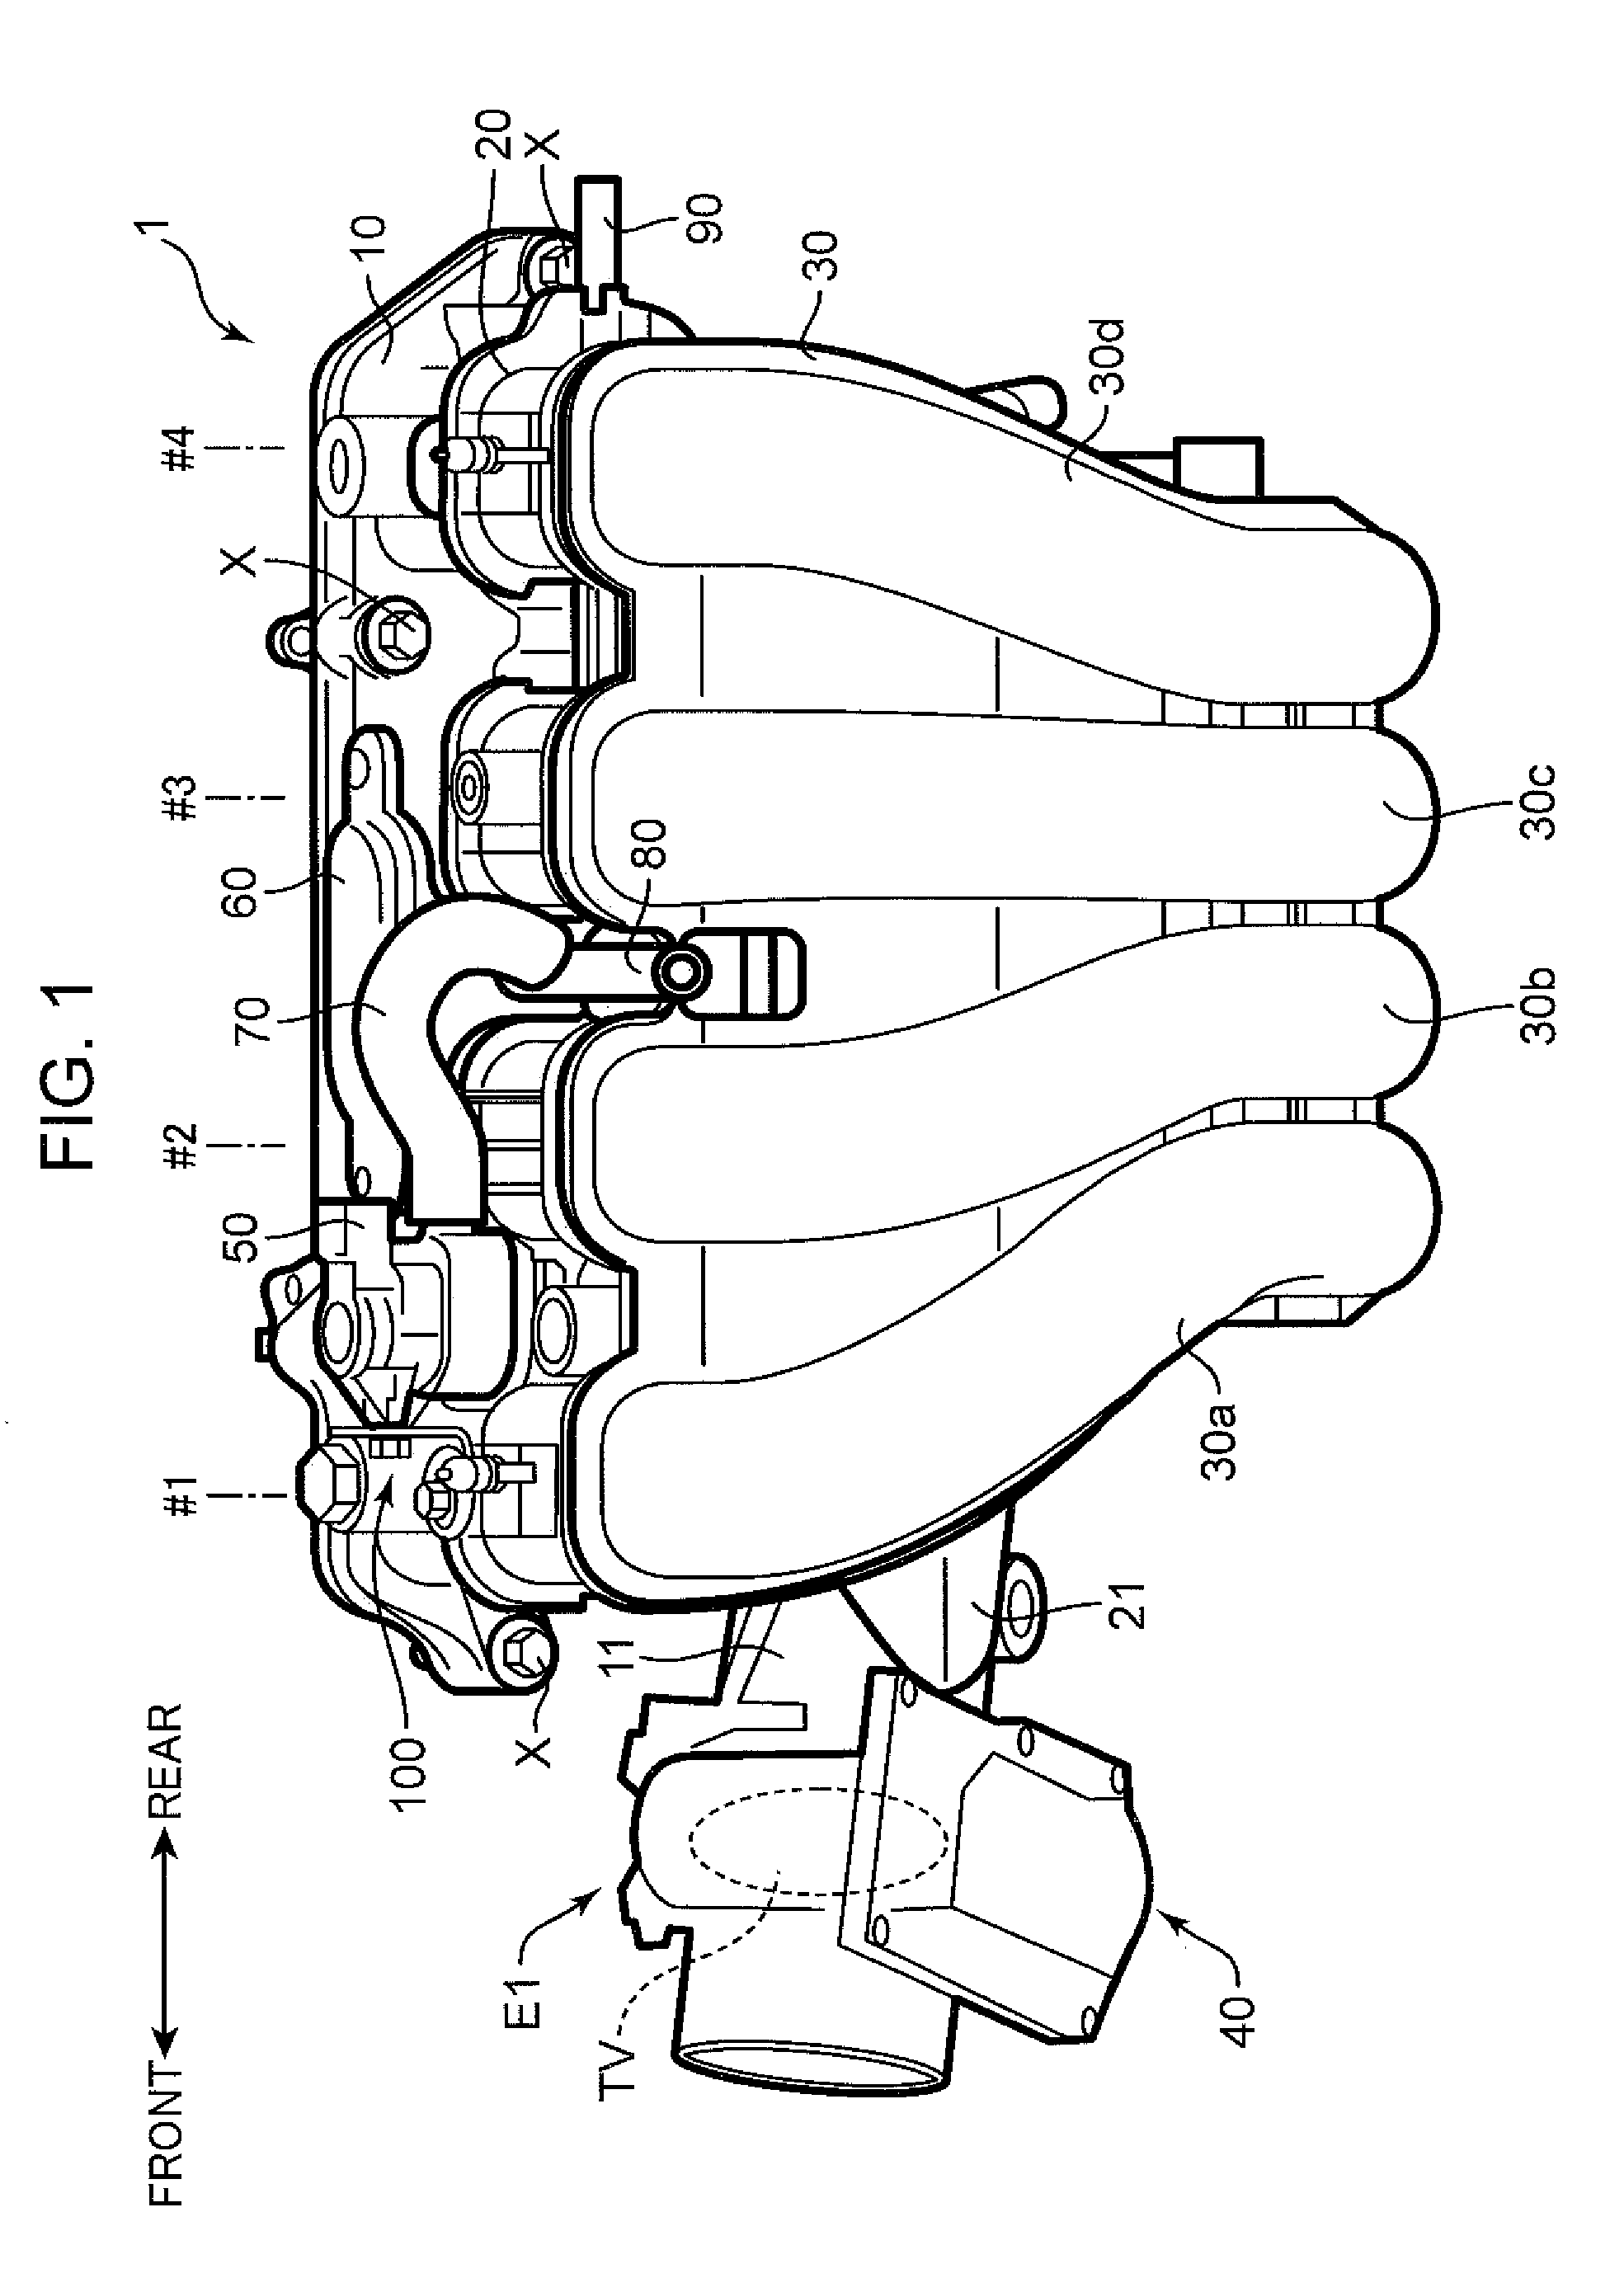 Intake manifold structure for engine